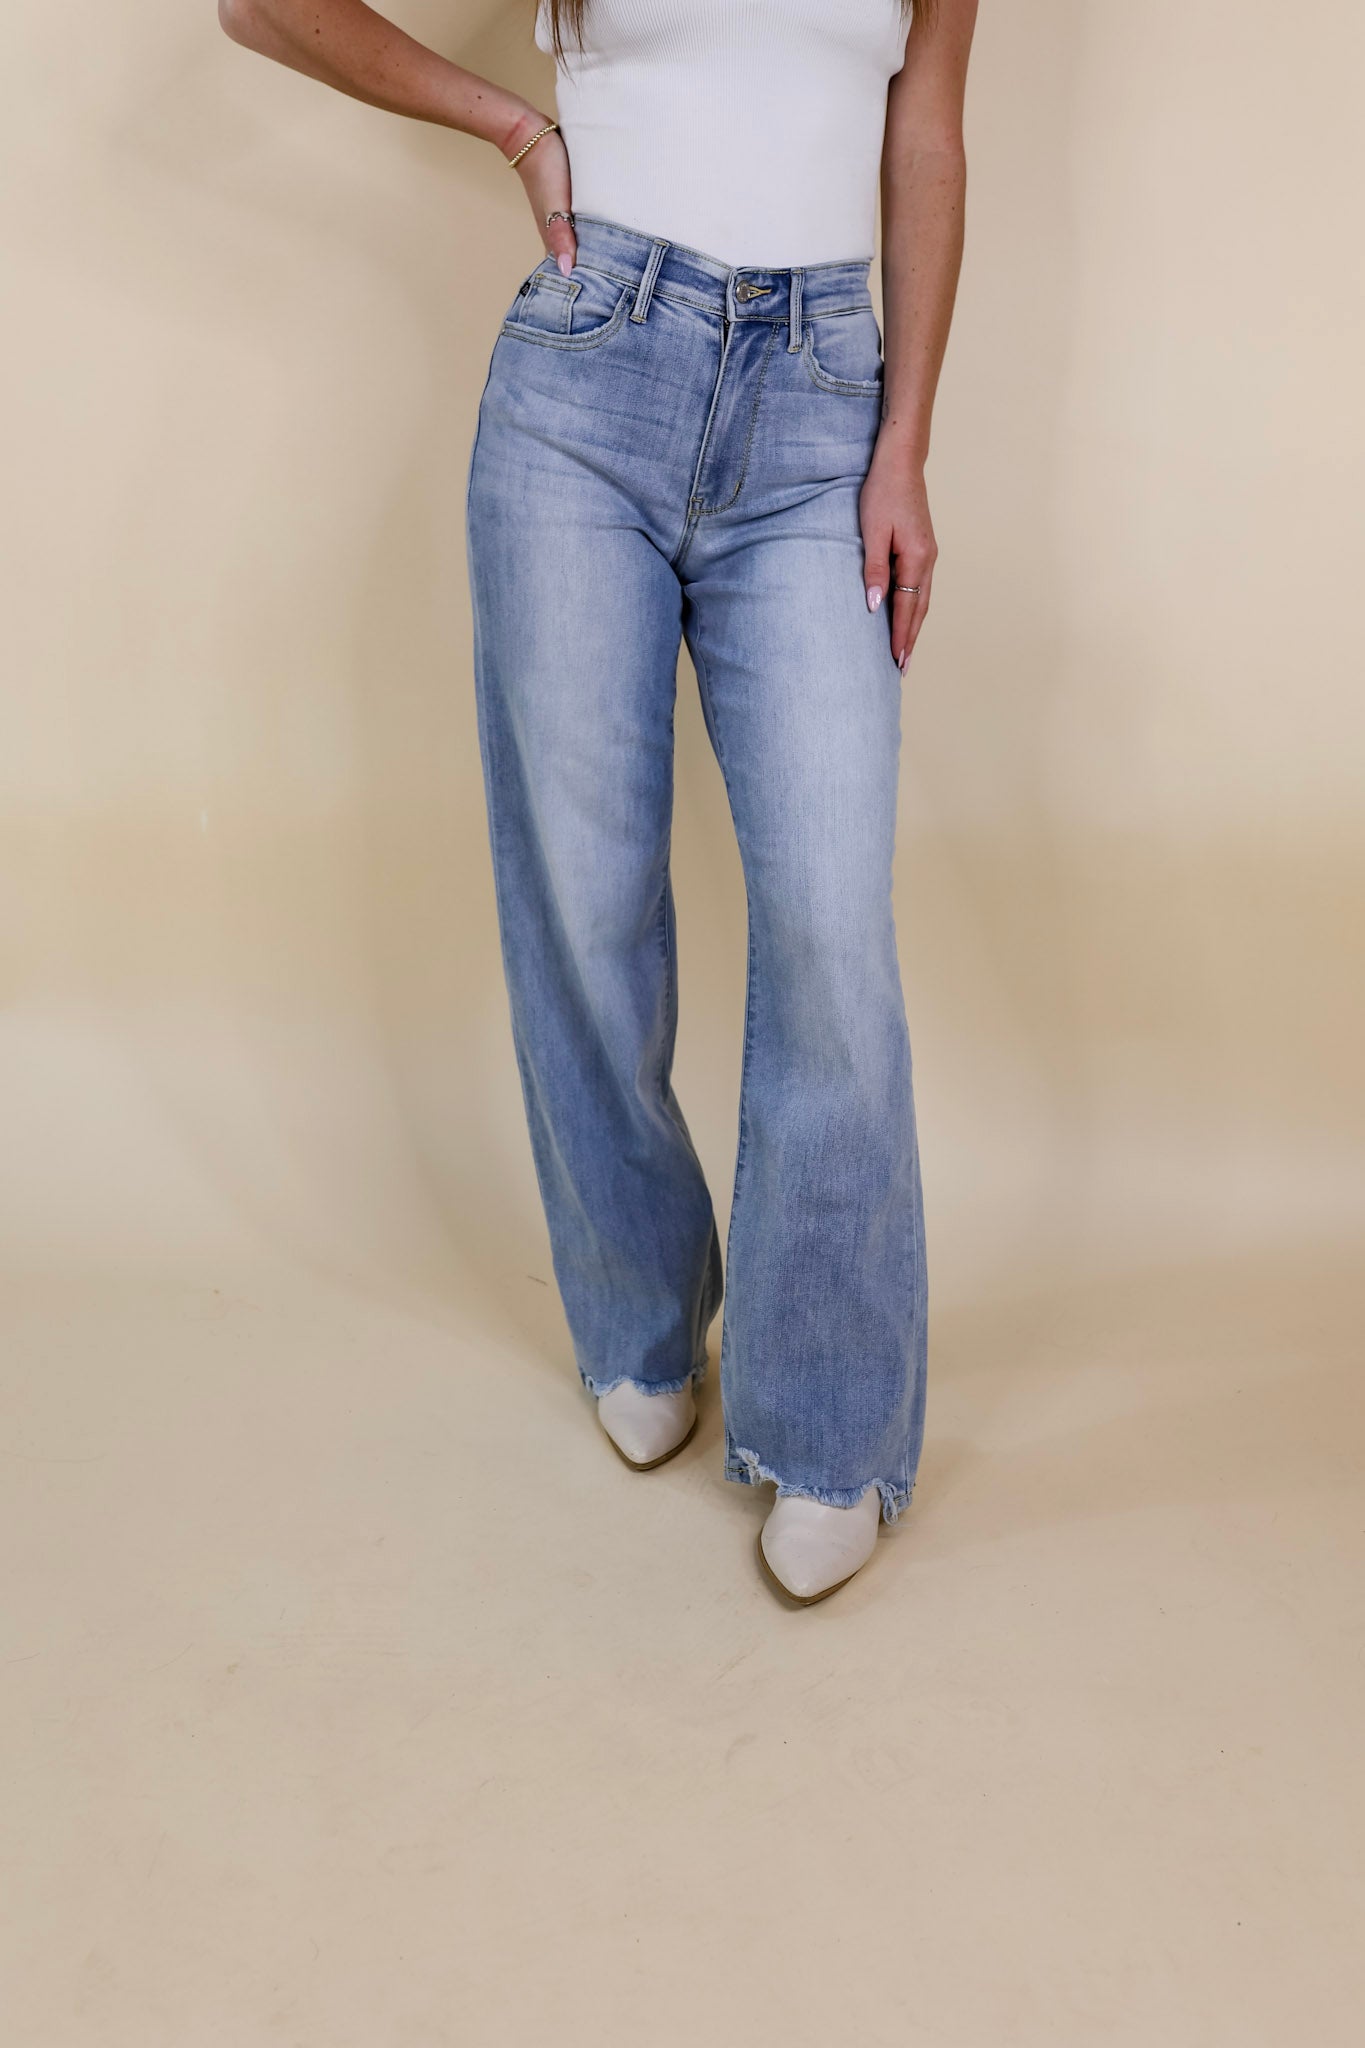 Judy Blue | Fascinating Day Destroy Hem Straight Leg Jeans in Light Wash - Giddy Up Glamour Boutique